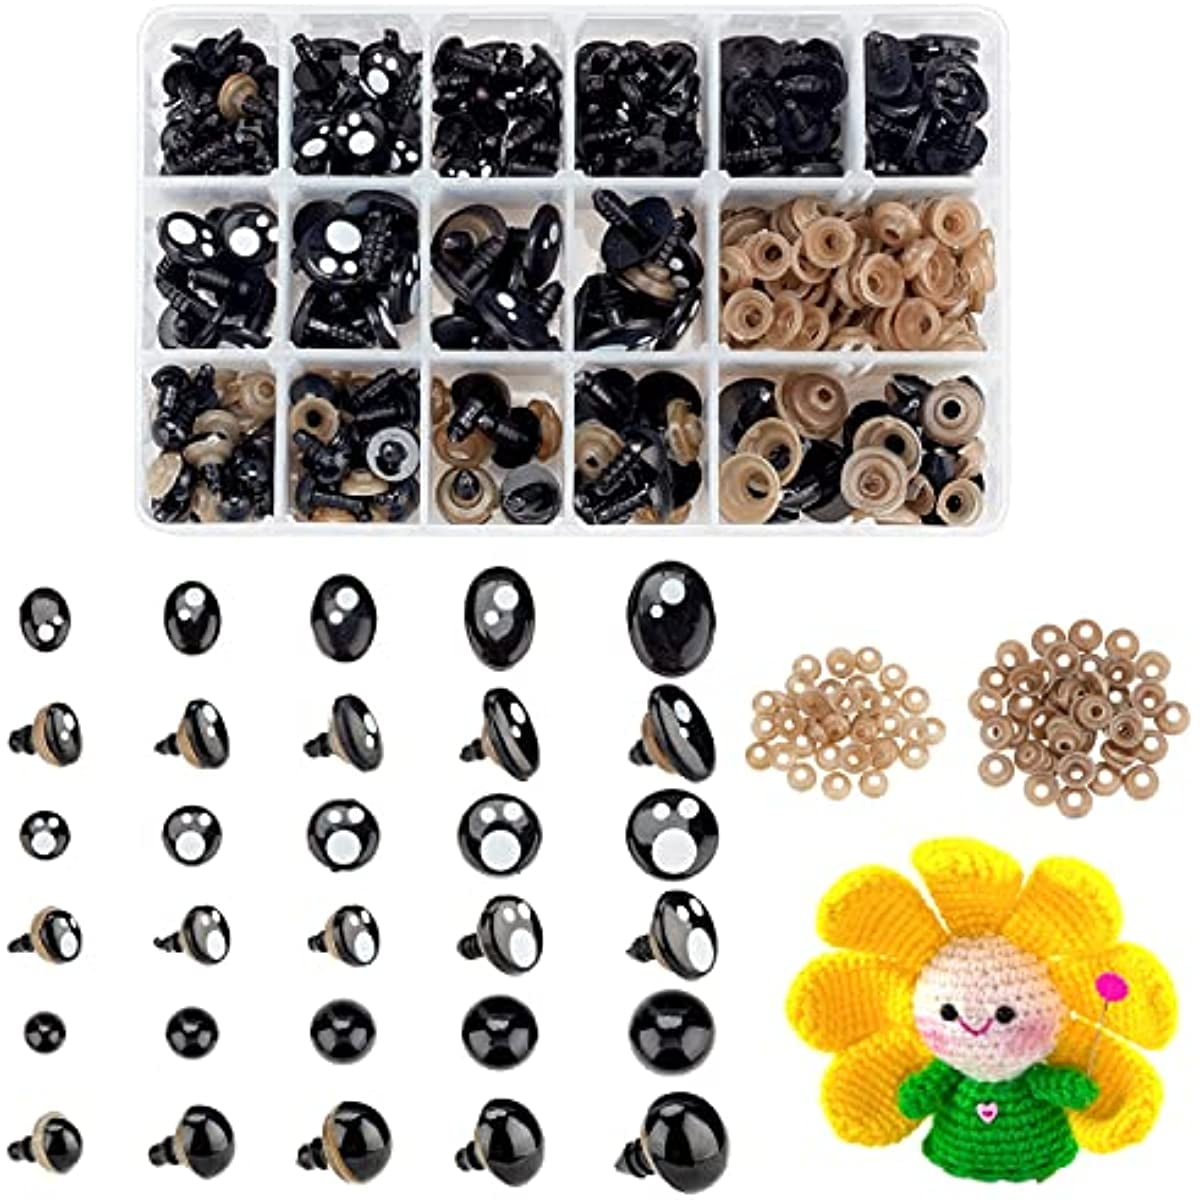 300pcs Black Crafts Eyes 5 Sizes Animal Eyes Round Domed Buttons Black Mushroom Eyes Sewing Shank Button Solid Eyes for Crochet Puppet Plush Stuffed